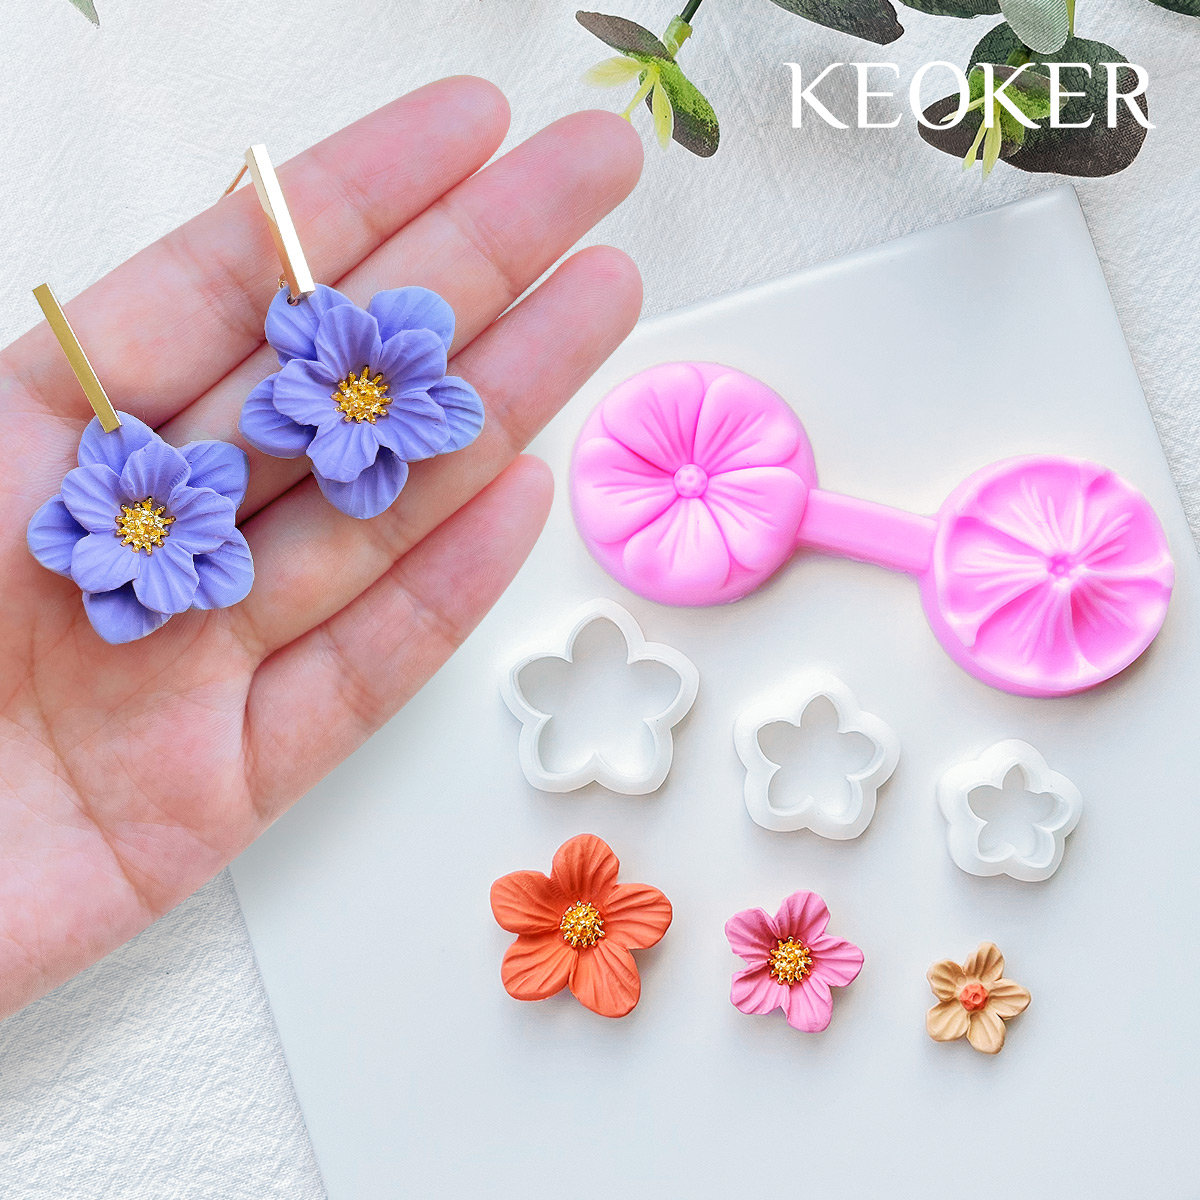 Keoker Polymer Clay Texture Sheets, Clay Texture Mat for Making Earrings  Jewerly, Polymer Clay Earrings Tools 